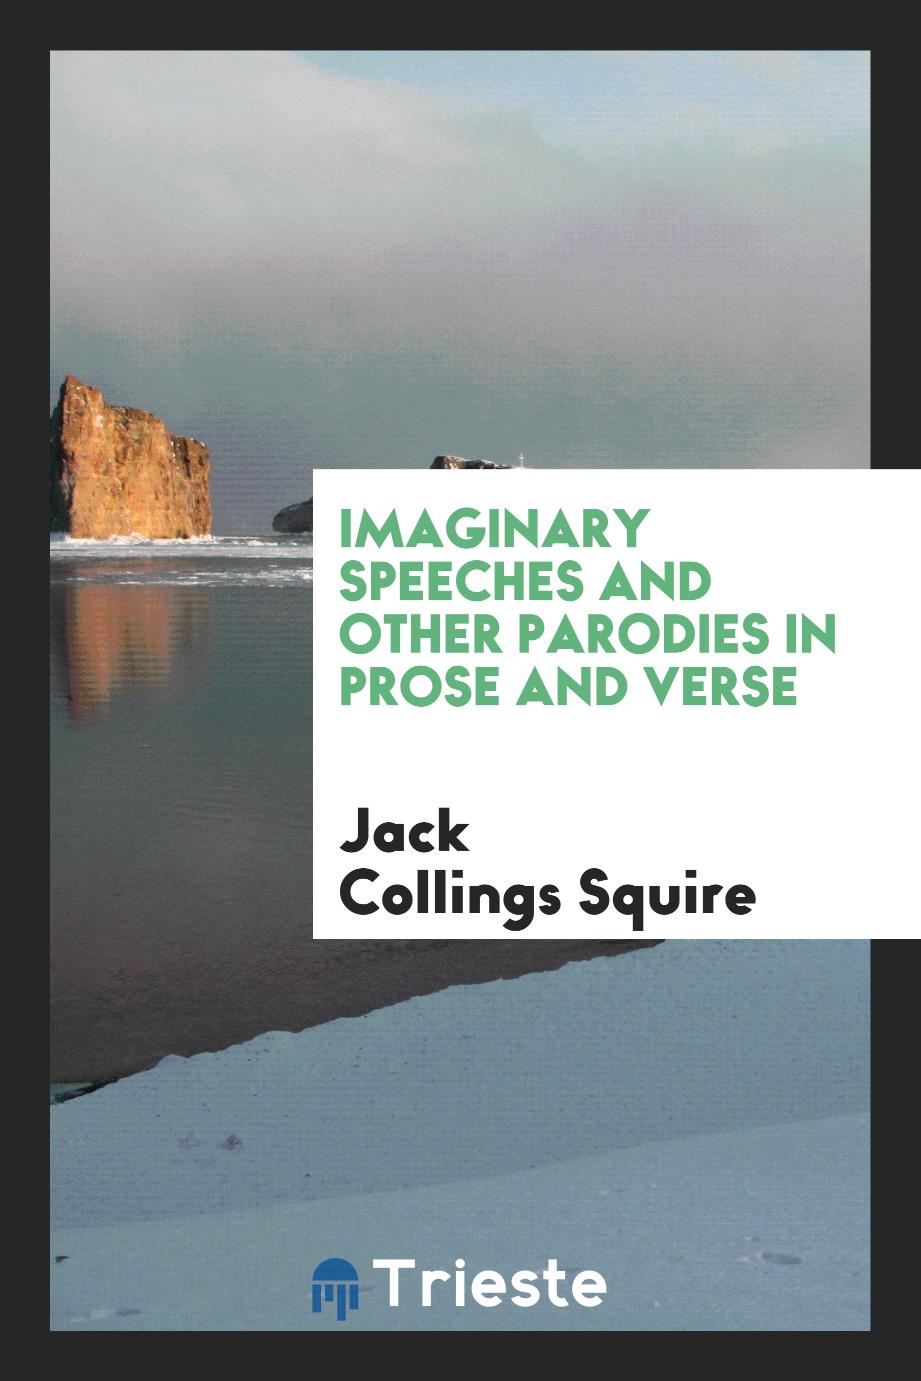 Imaginary speeches and other parodies in prose and verse